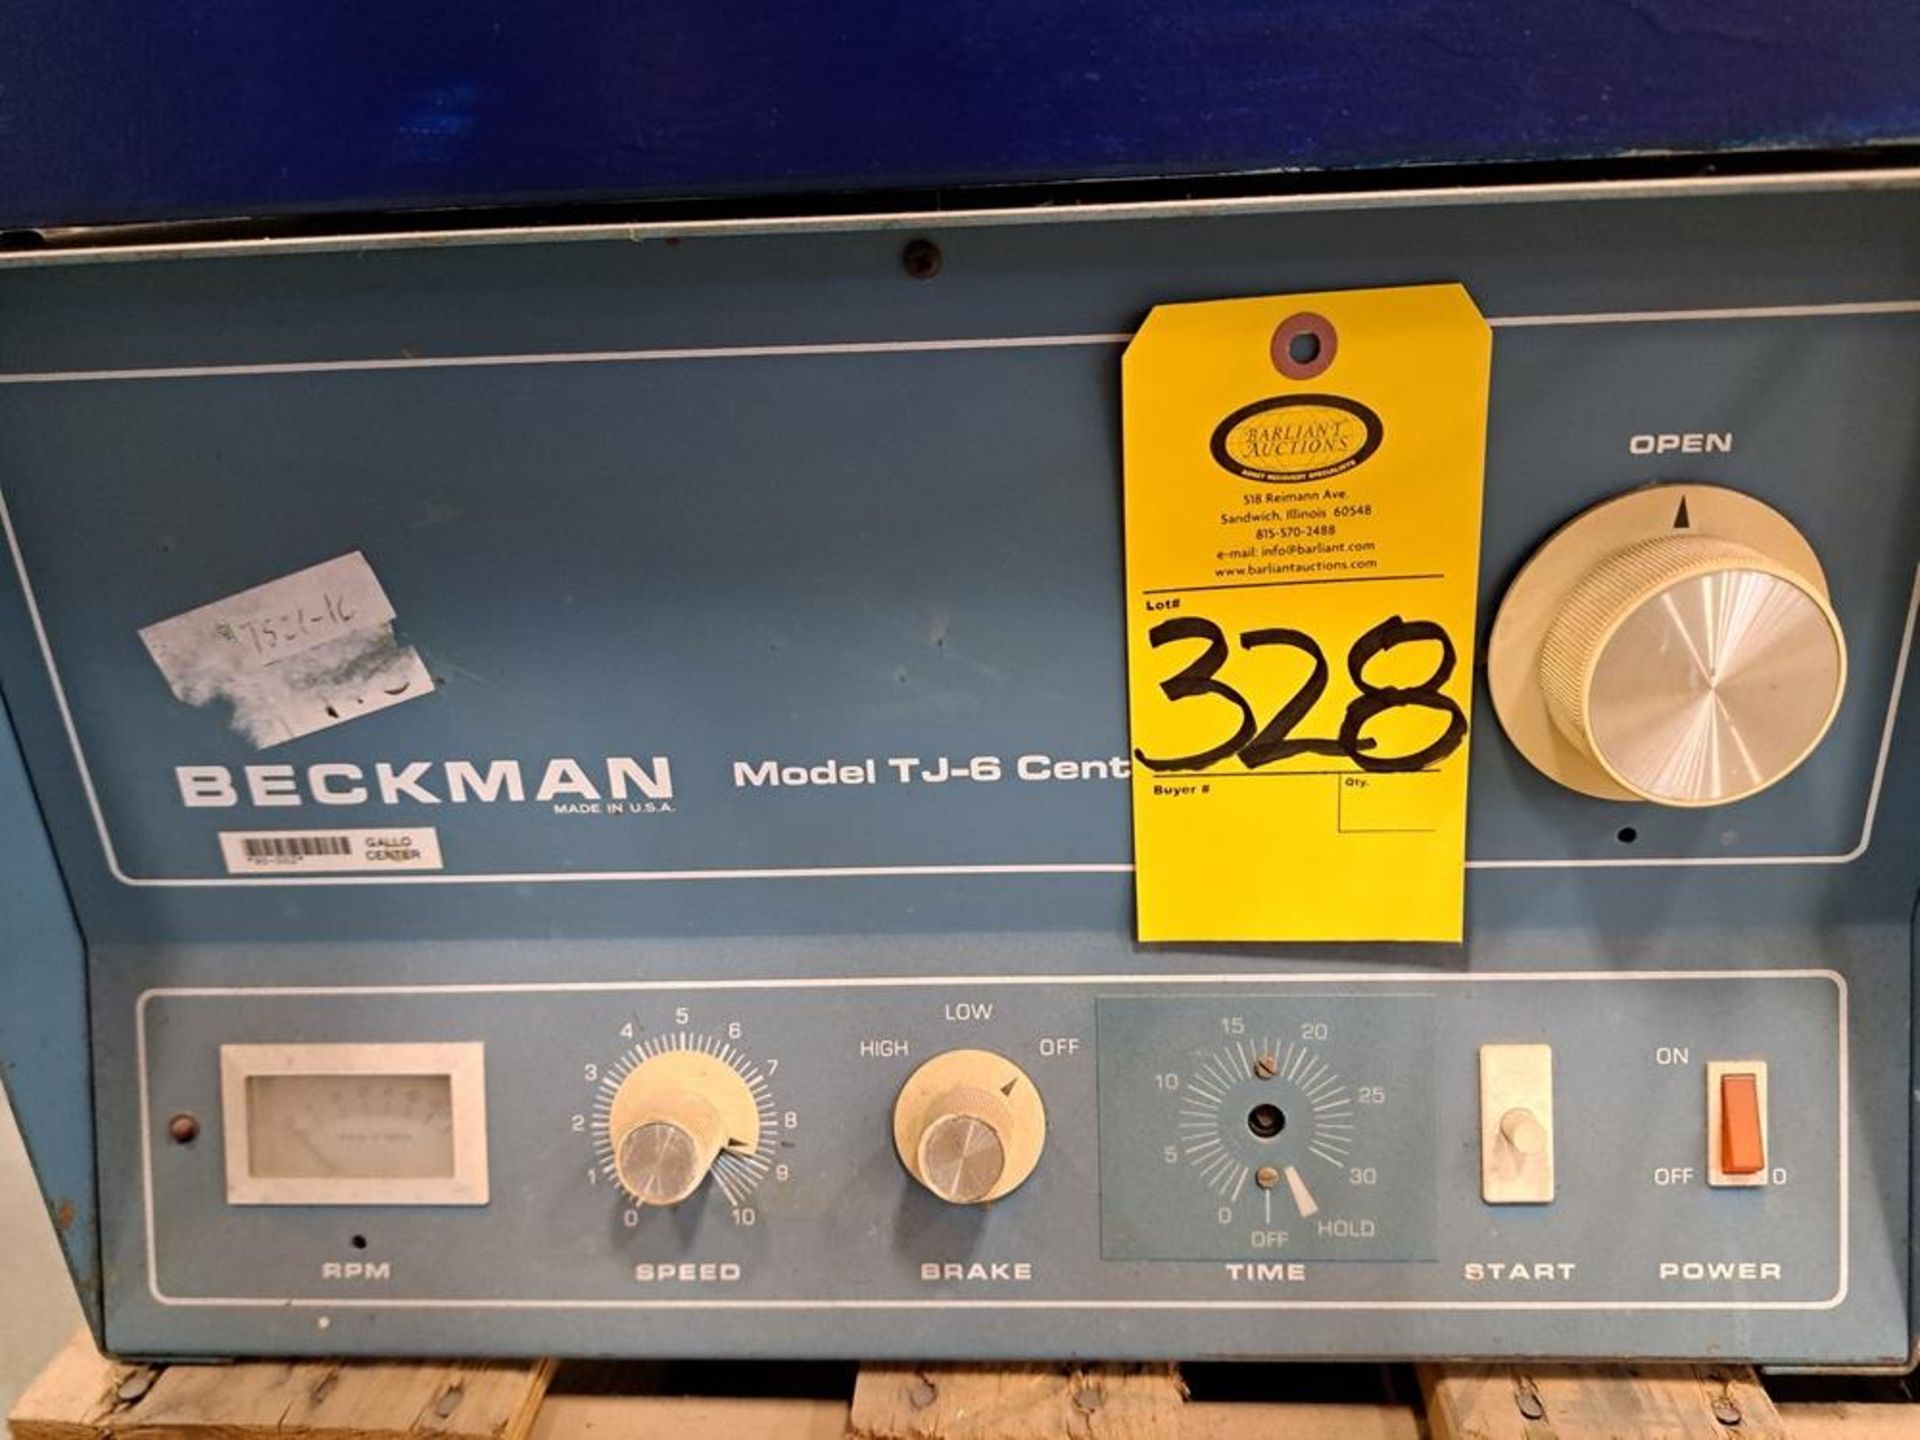 Beckman Mdl. TJ-6 Centrifuge, 120 volts (Required Loading Fee: $25.00) NO HAND CARRY (Price Is For - Image 2 of 2